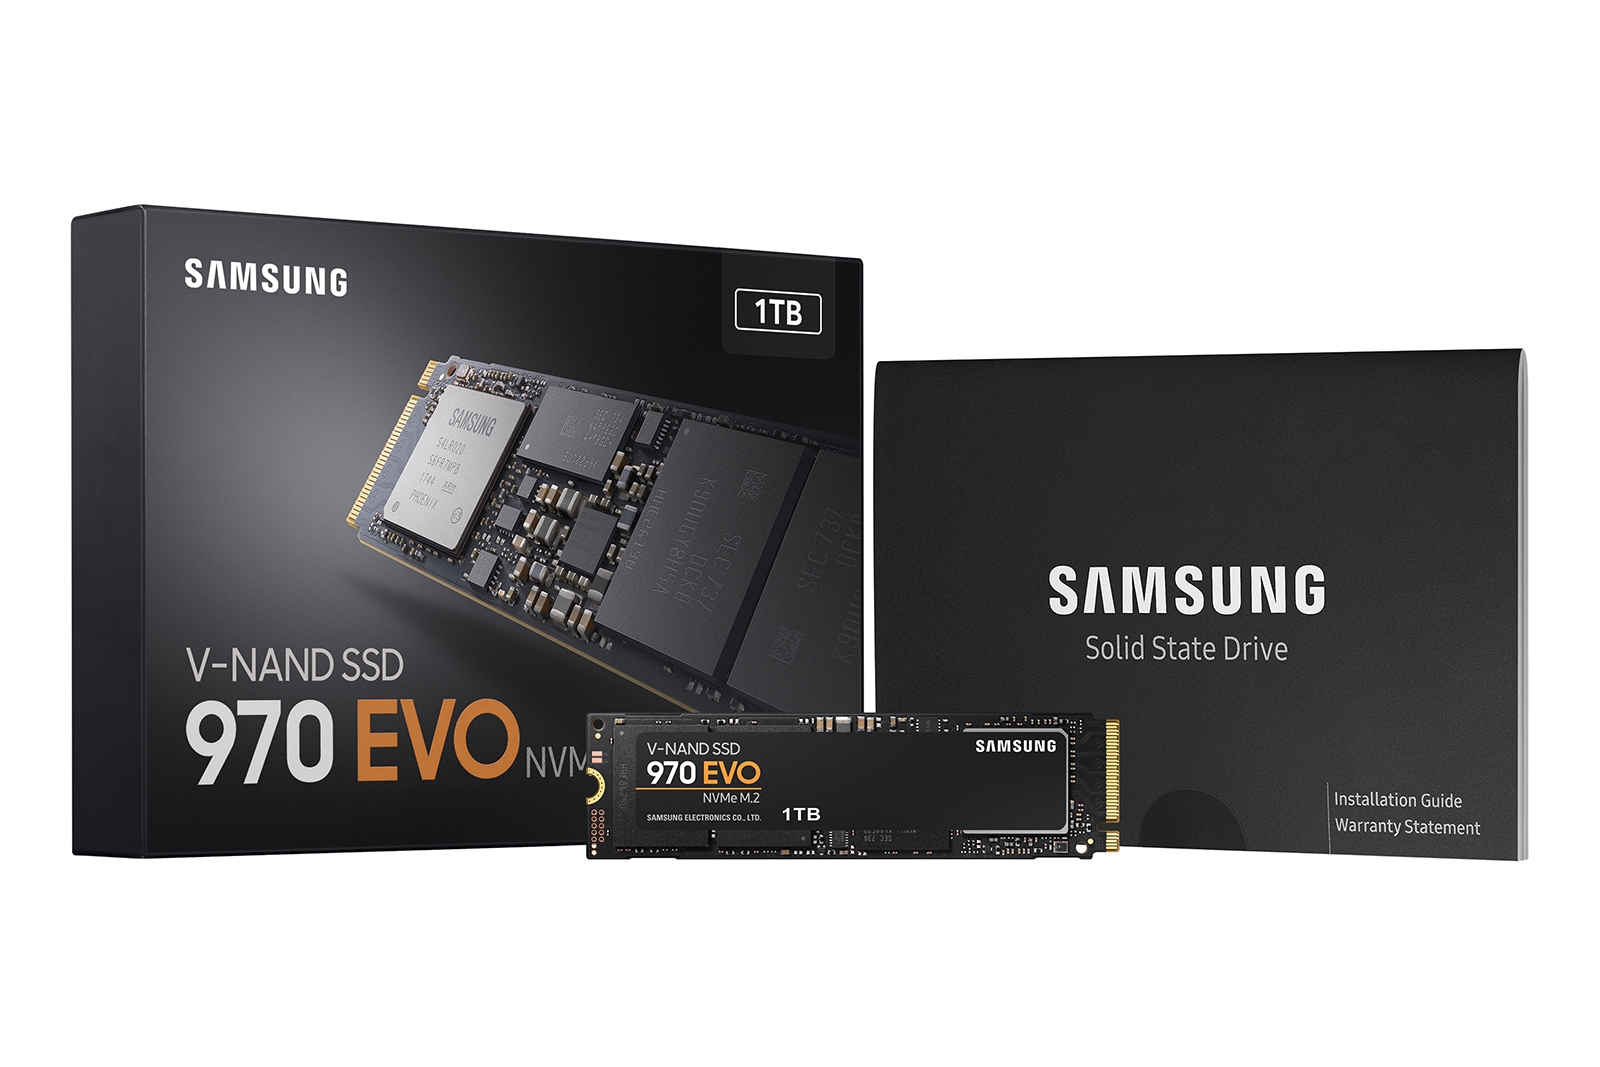  SAMSUNG 970 EVO SSD 1TB - M.2 NVMe Interface Internal Solid  State Drive + 2mo Adobe CC Photography with V-NAND Technology  (MZ-V7E1T0BW), Black/Red : Electronics